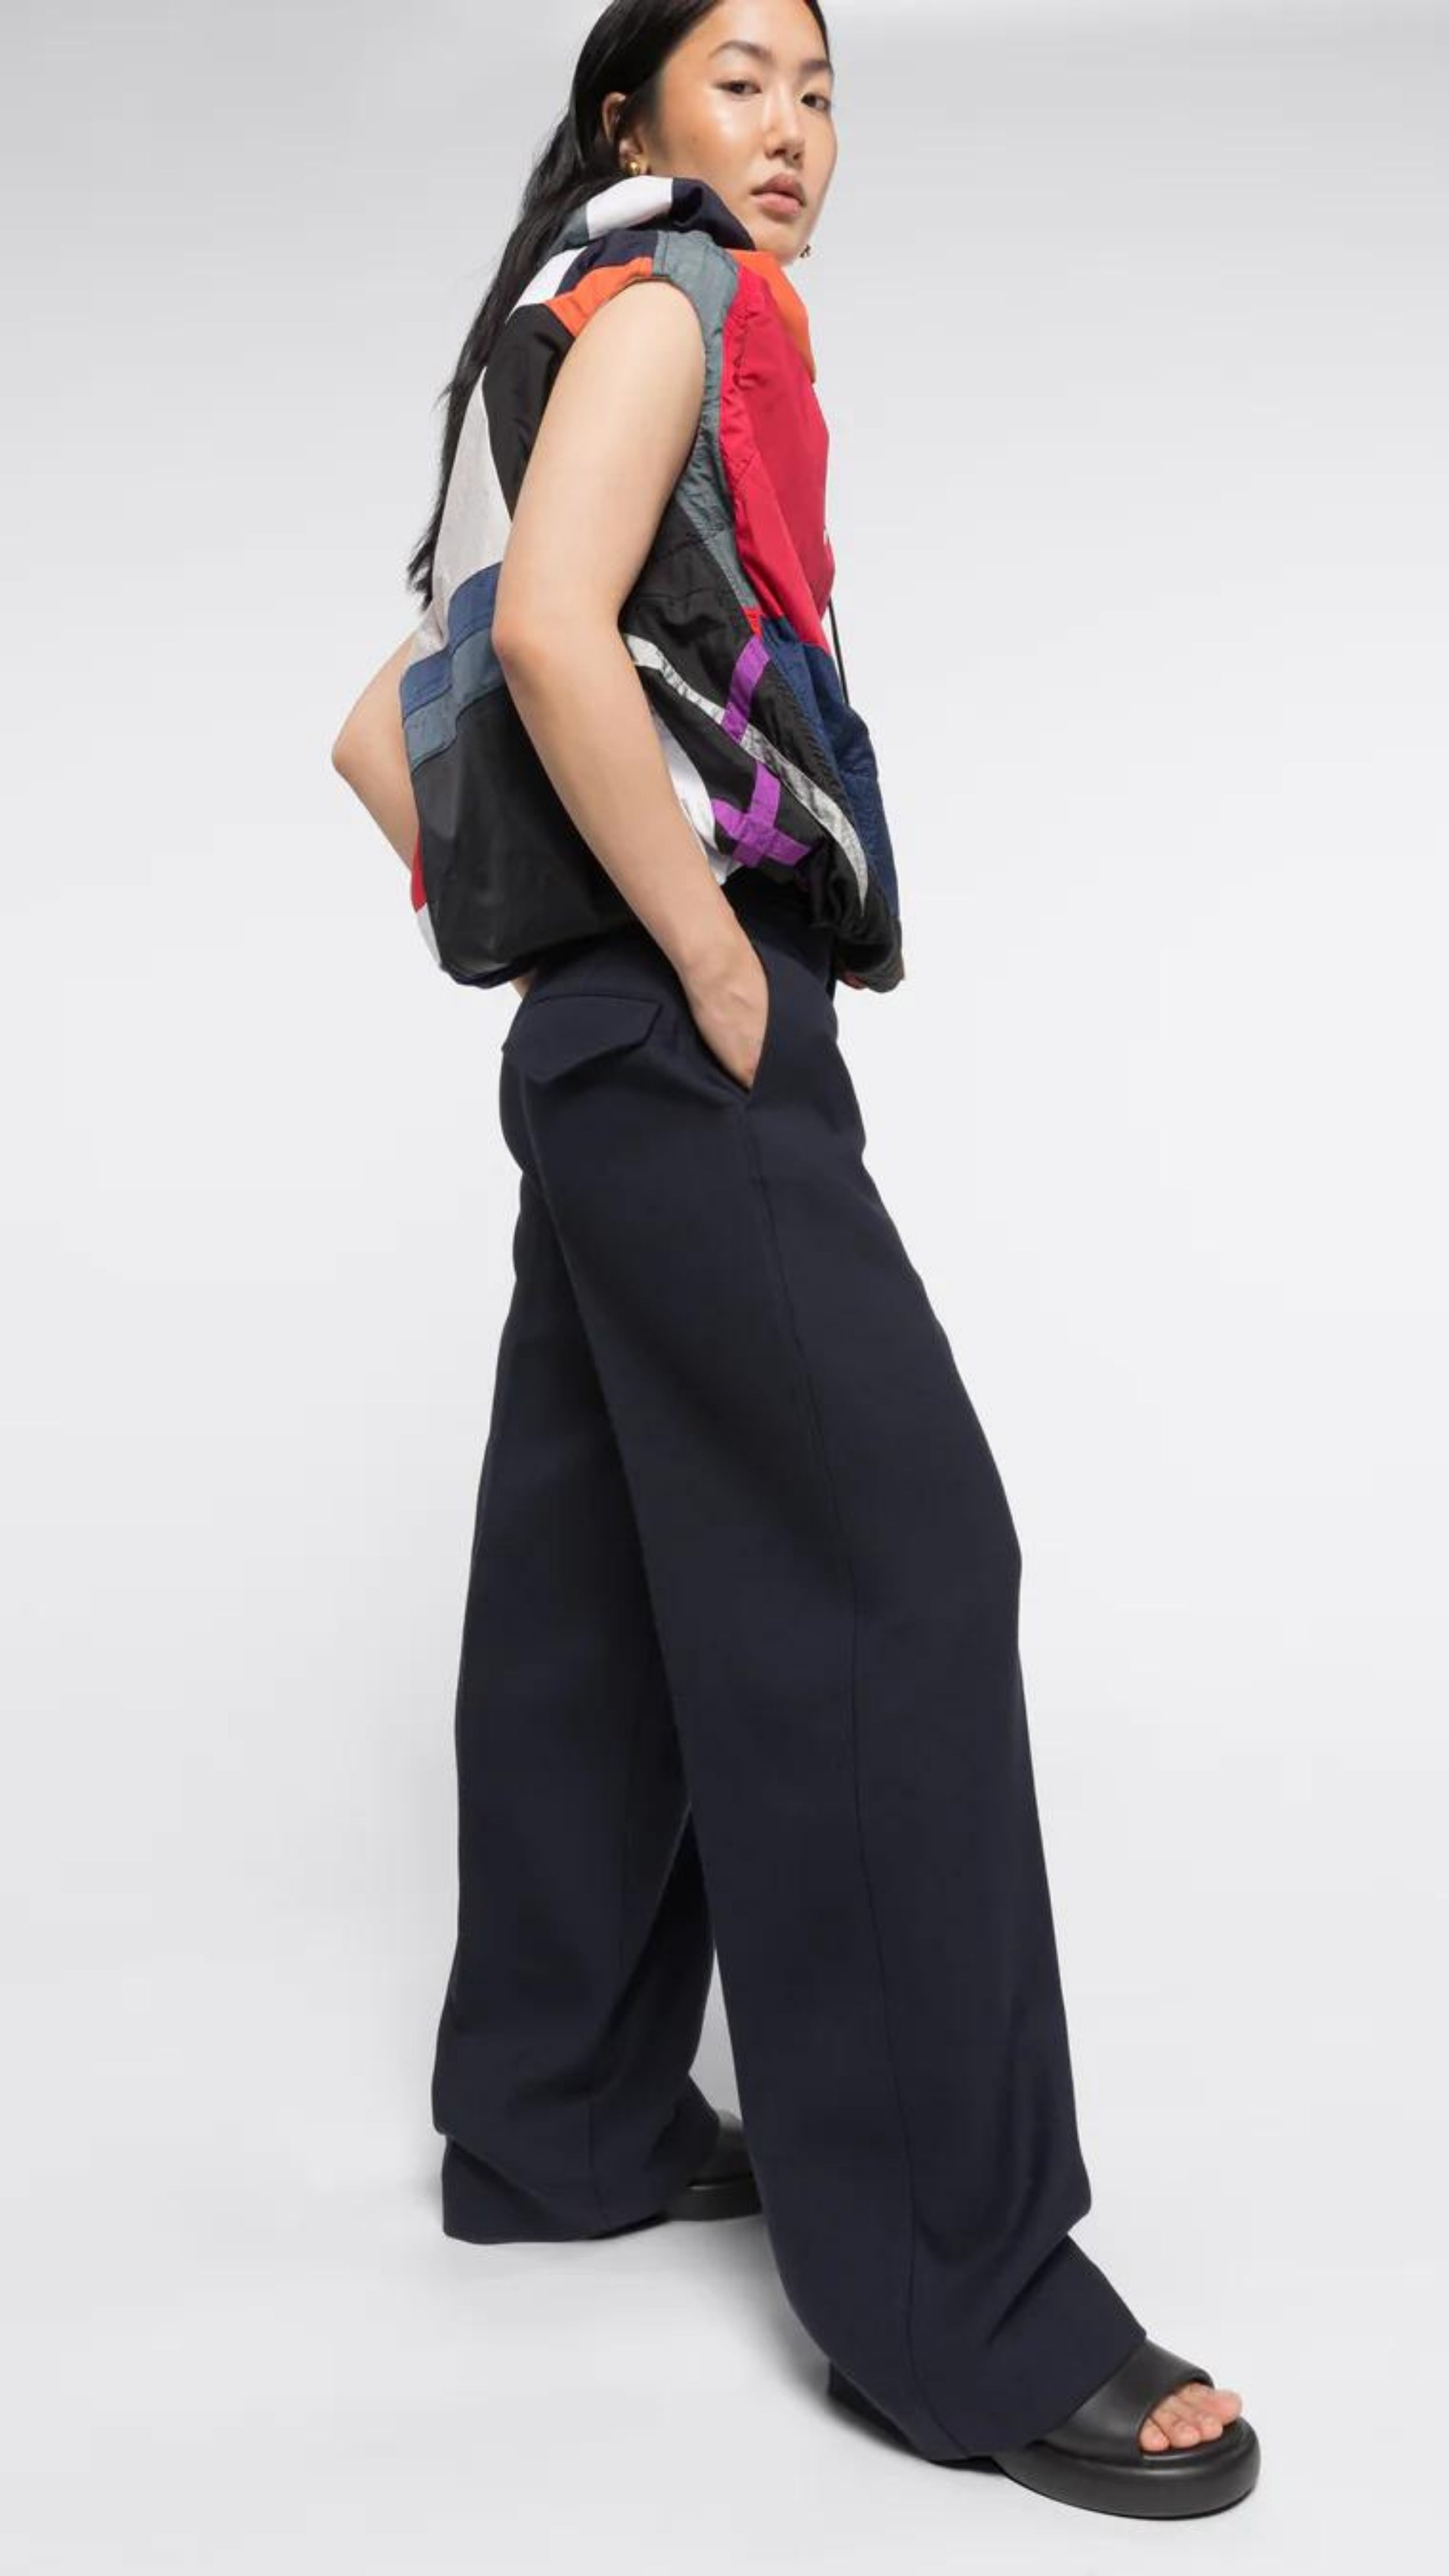 Colville AZ Factory Lucinda Chambers Molly Molloy, Double Wool Wide Leg Pants in Navy. Loose fitting boyfriend sit trouser pants. Crafted from navy blue wool in Italy. Shown on model facing to the side..